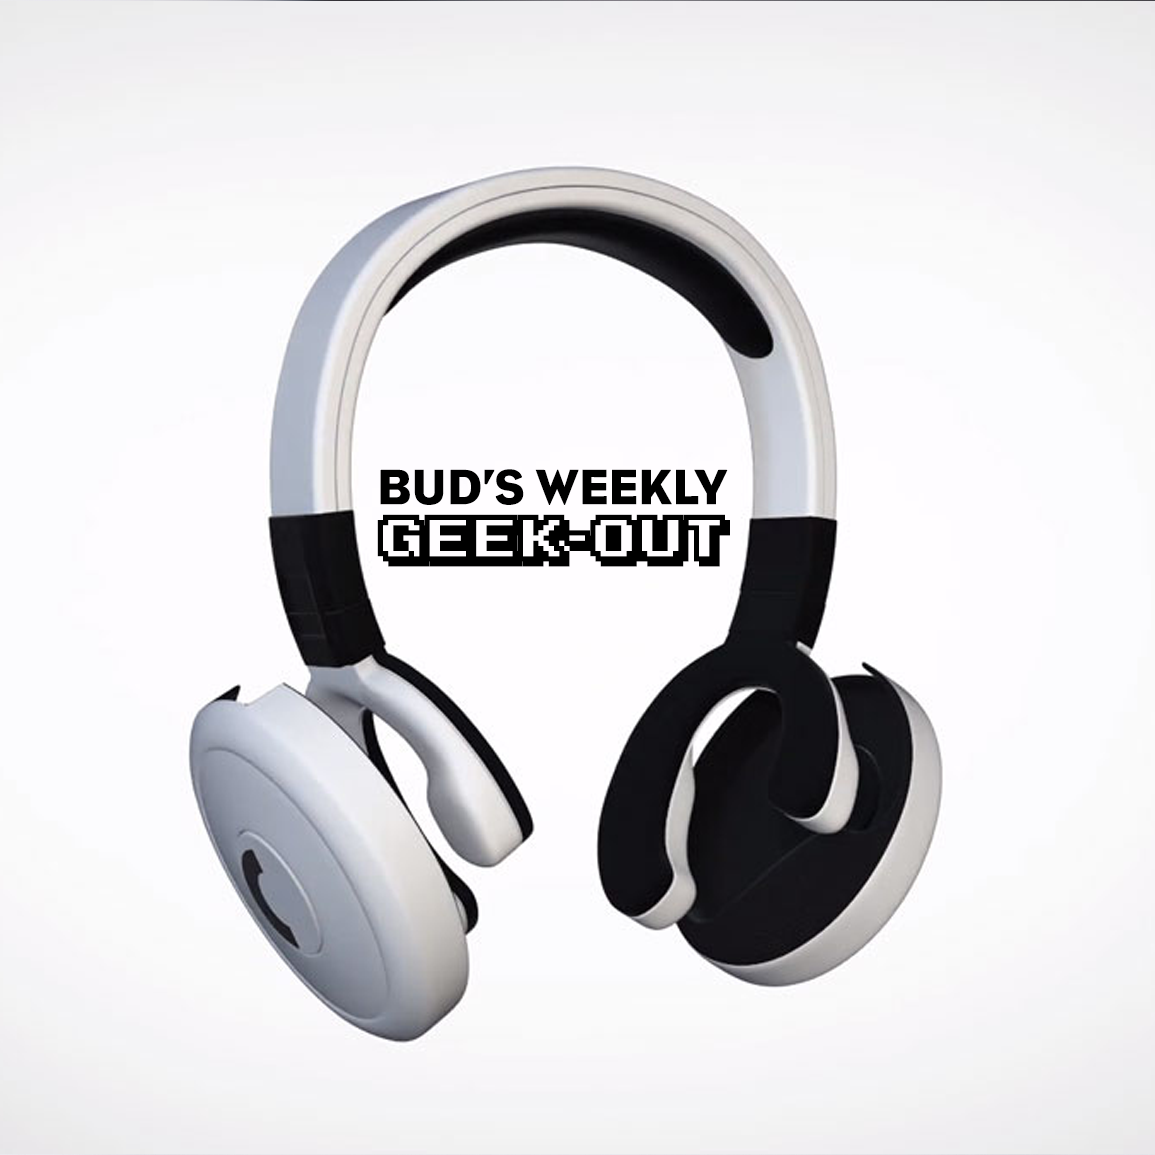 Bud's Weekly Geek-out! 20220427 - Dome D4 bone conduction headphones